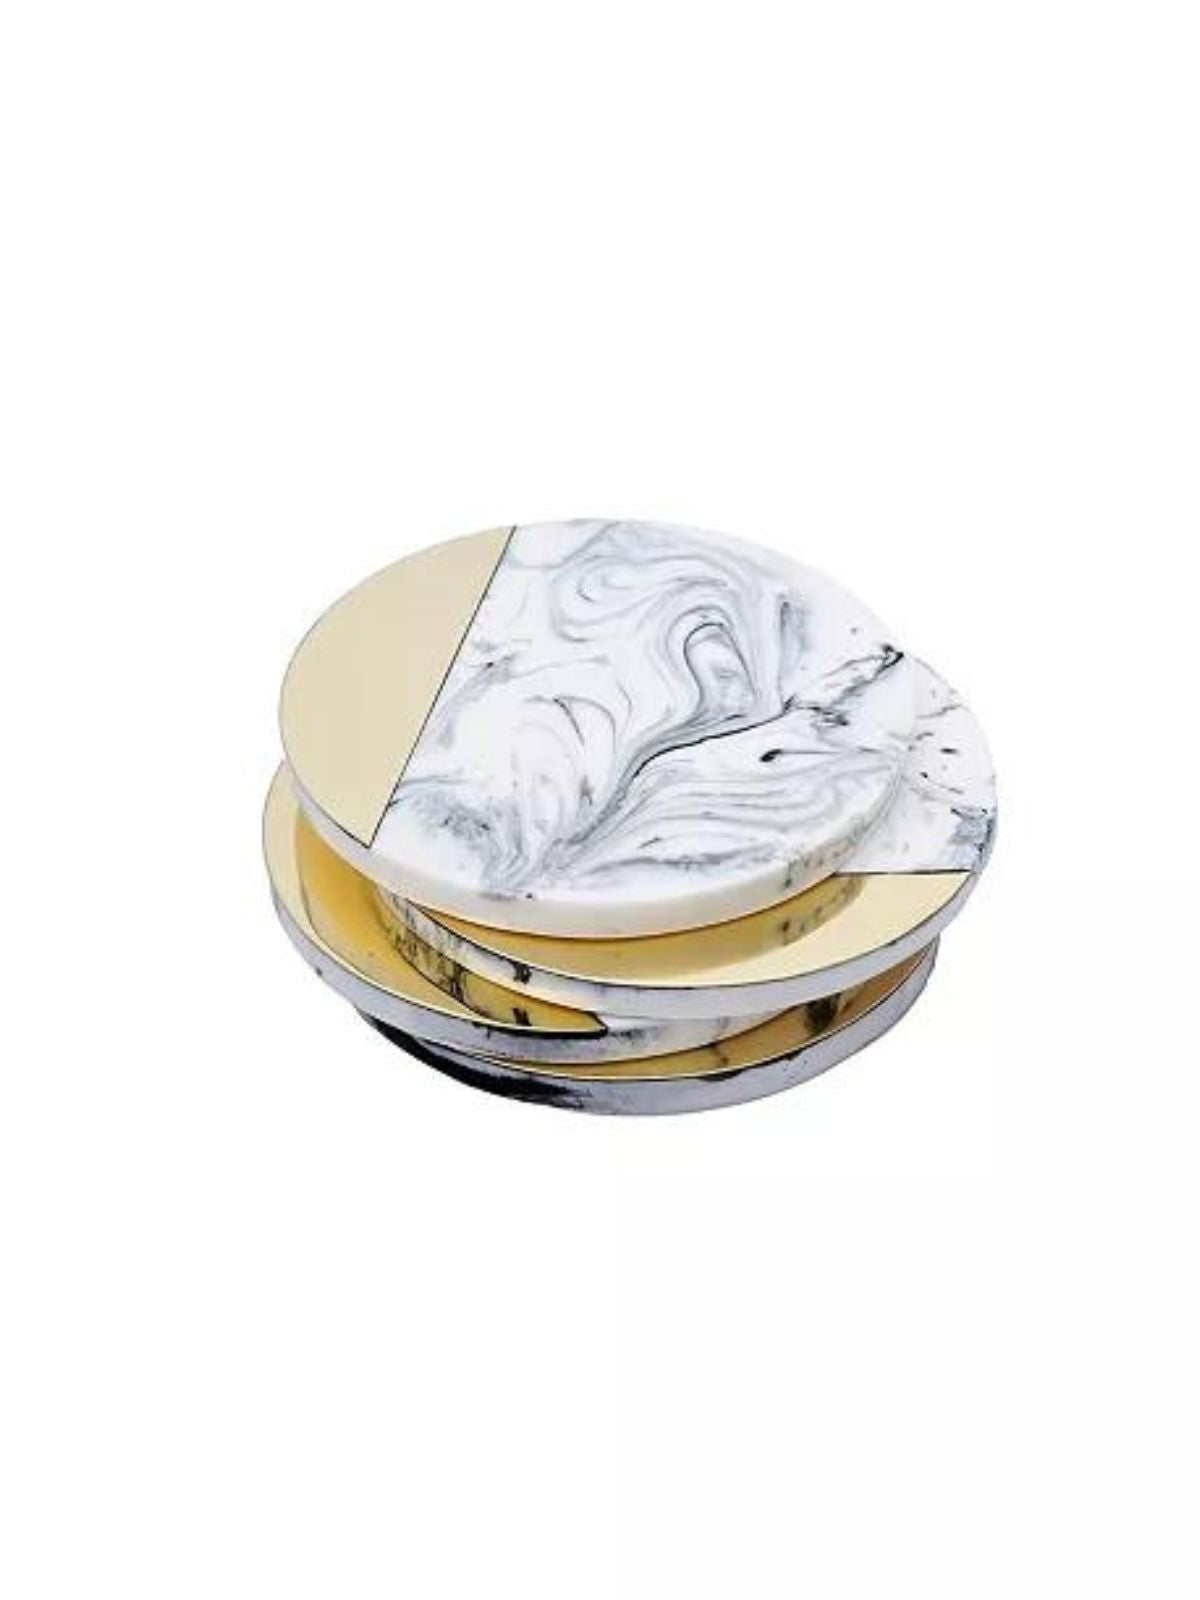 This is a stunning set of 4 coasters decorated with a marble design and gold brass sold by KYA Home Decor. 